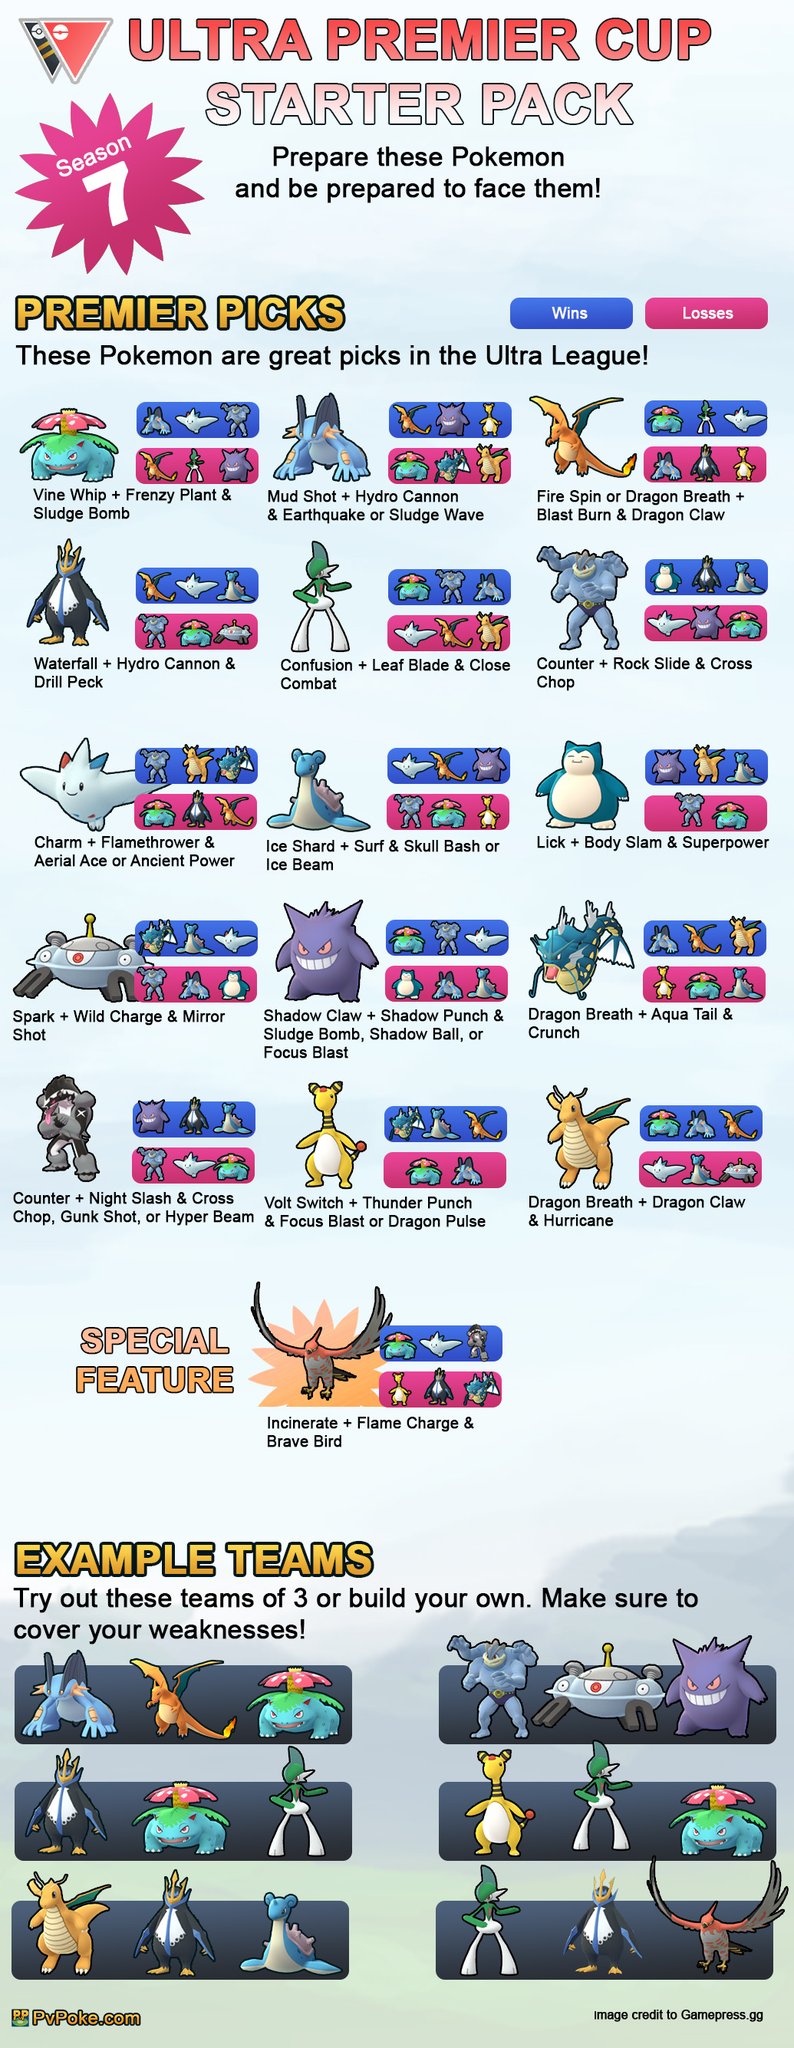 Pokemon Go Ultra League best team options and tips